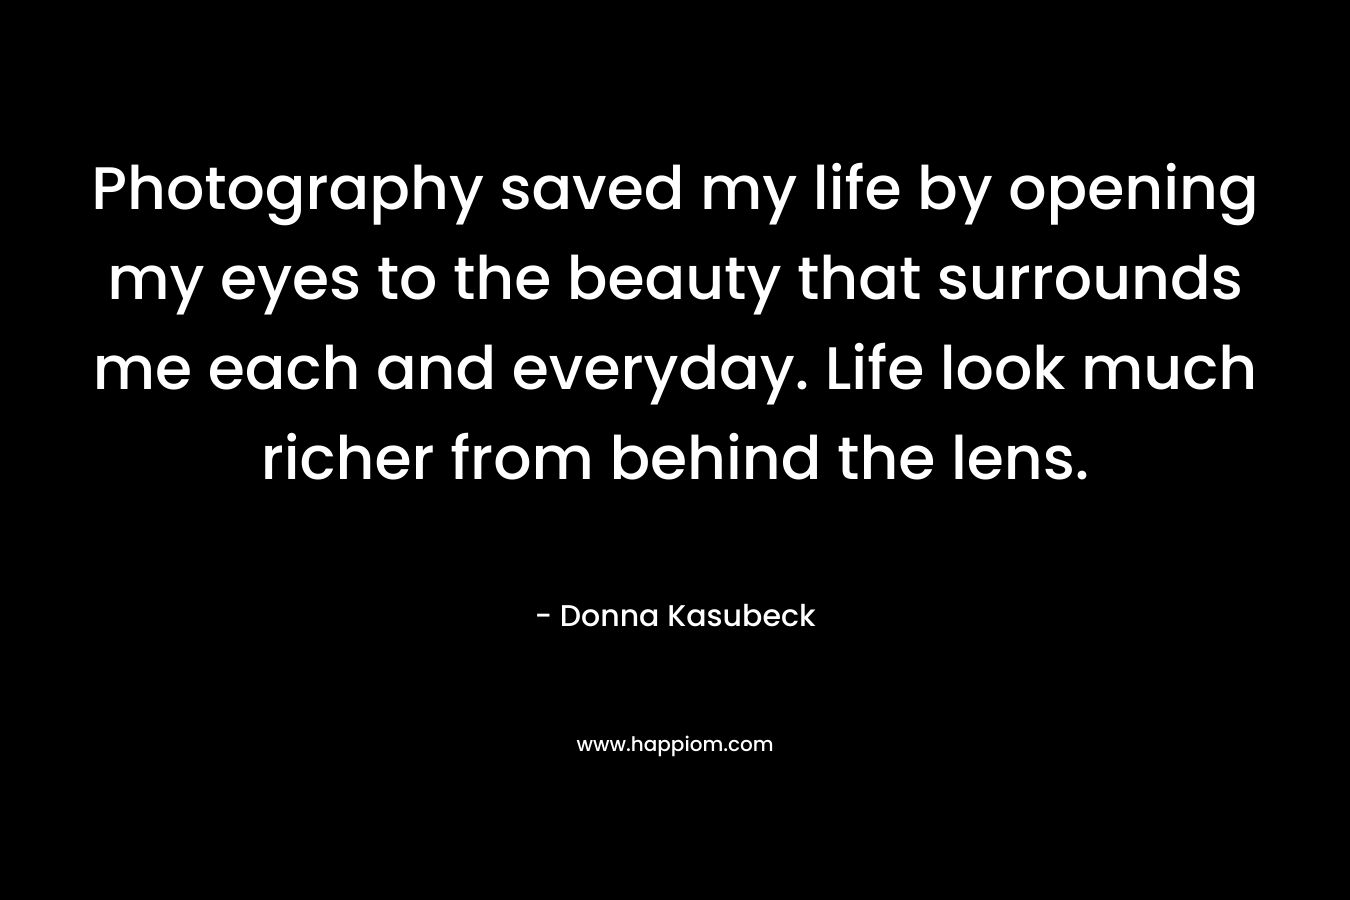 Photography saved my life by opening my eyes to the beauty that surrounds me each and everyday. Life look much richer from behind the lens. – Donna Kasubeck